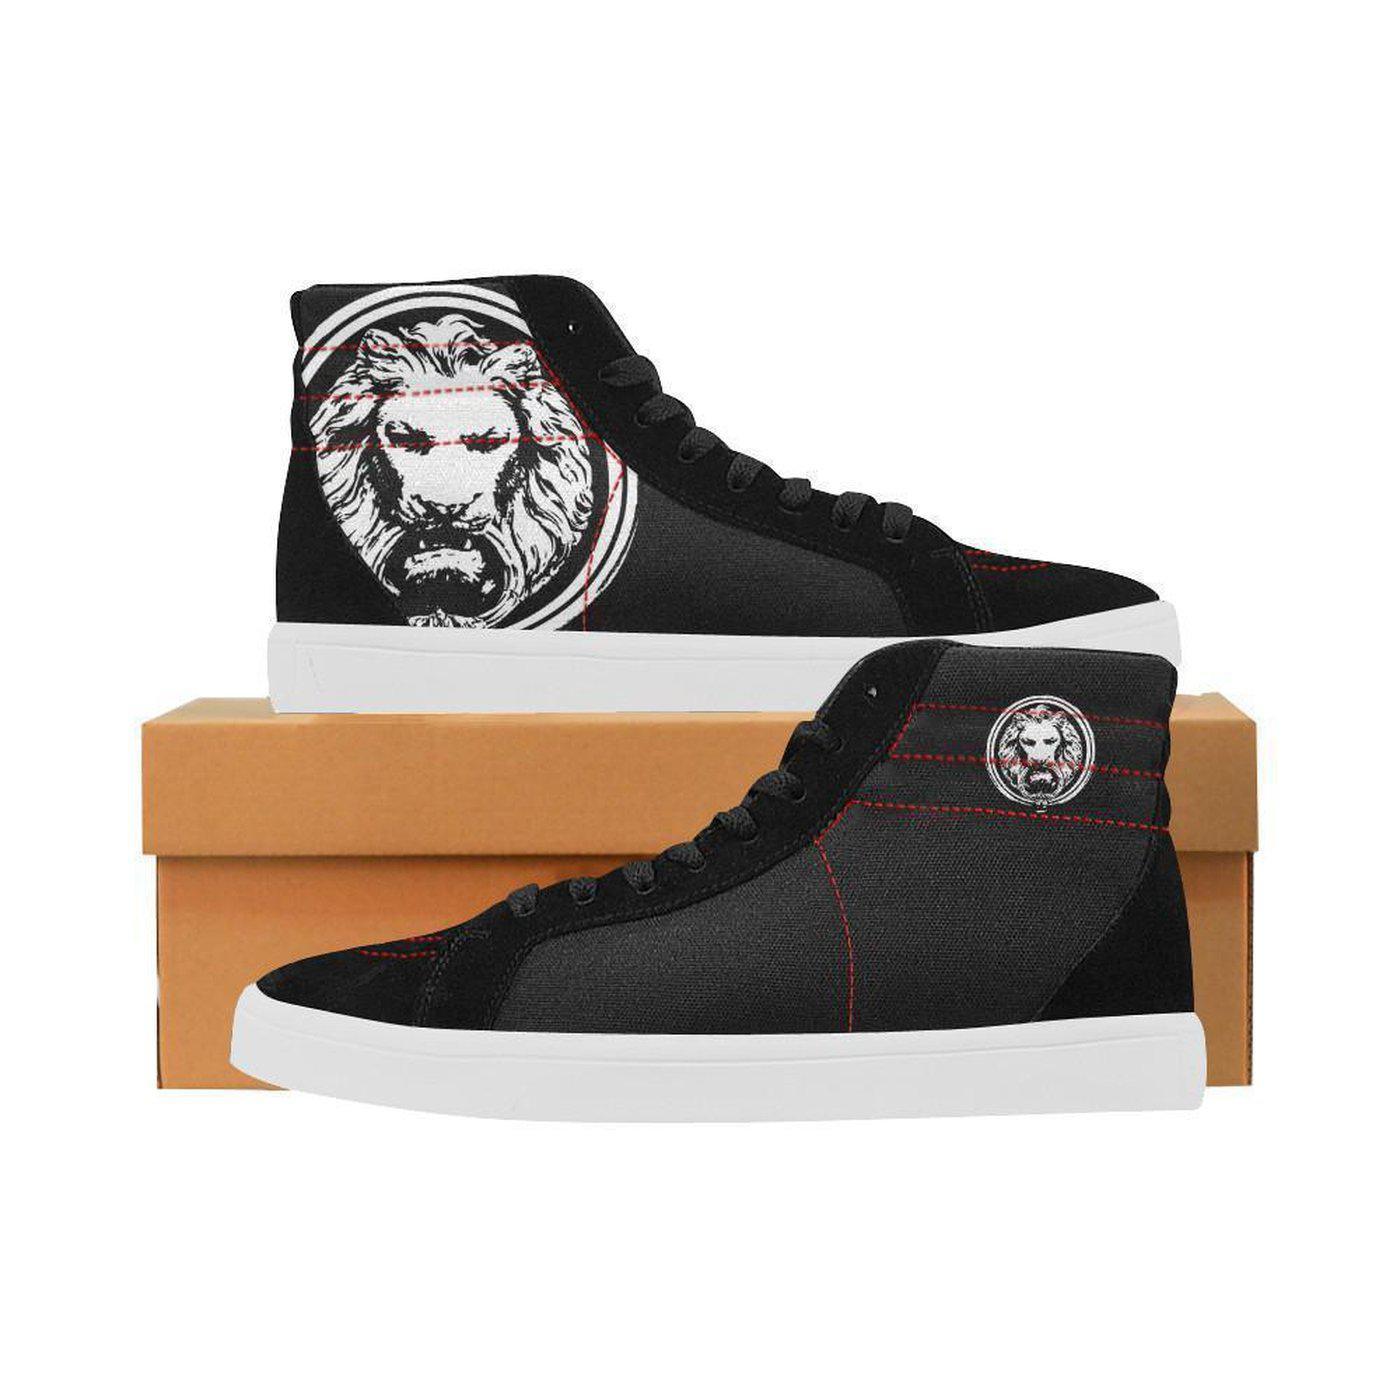 Mens Black Lion Skate Shoes with High Top - NO FIXED ABODE Punkrock Mens Luxury Streetwear UK